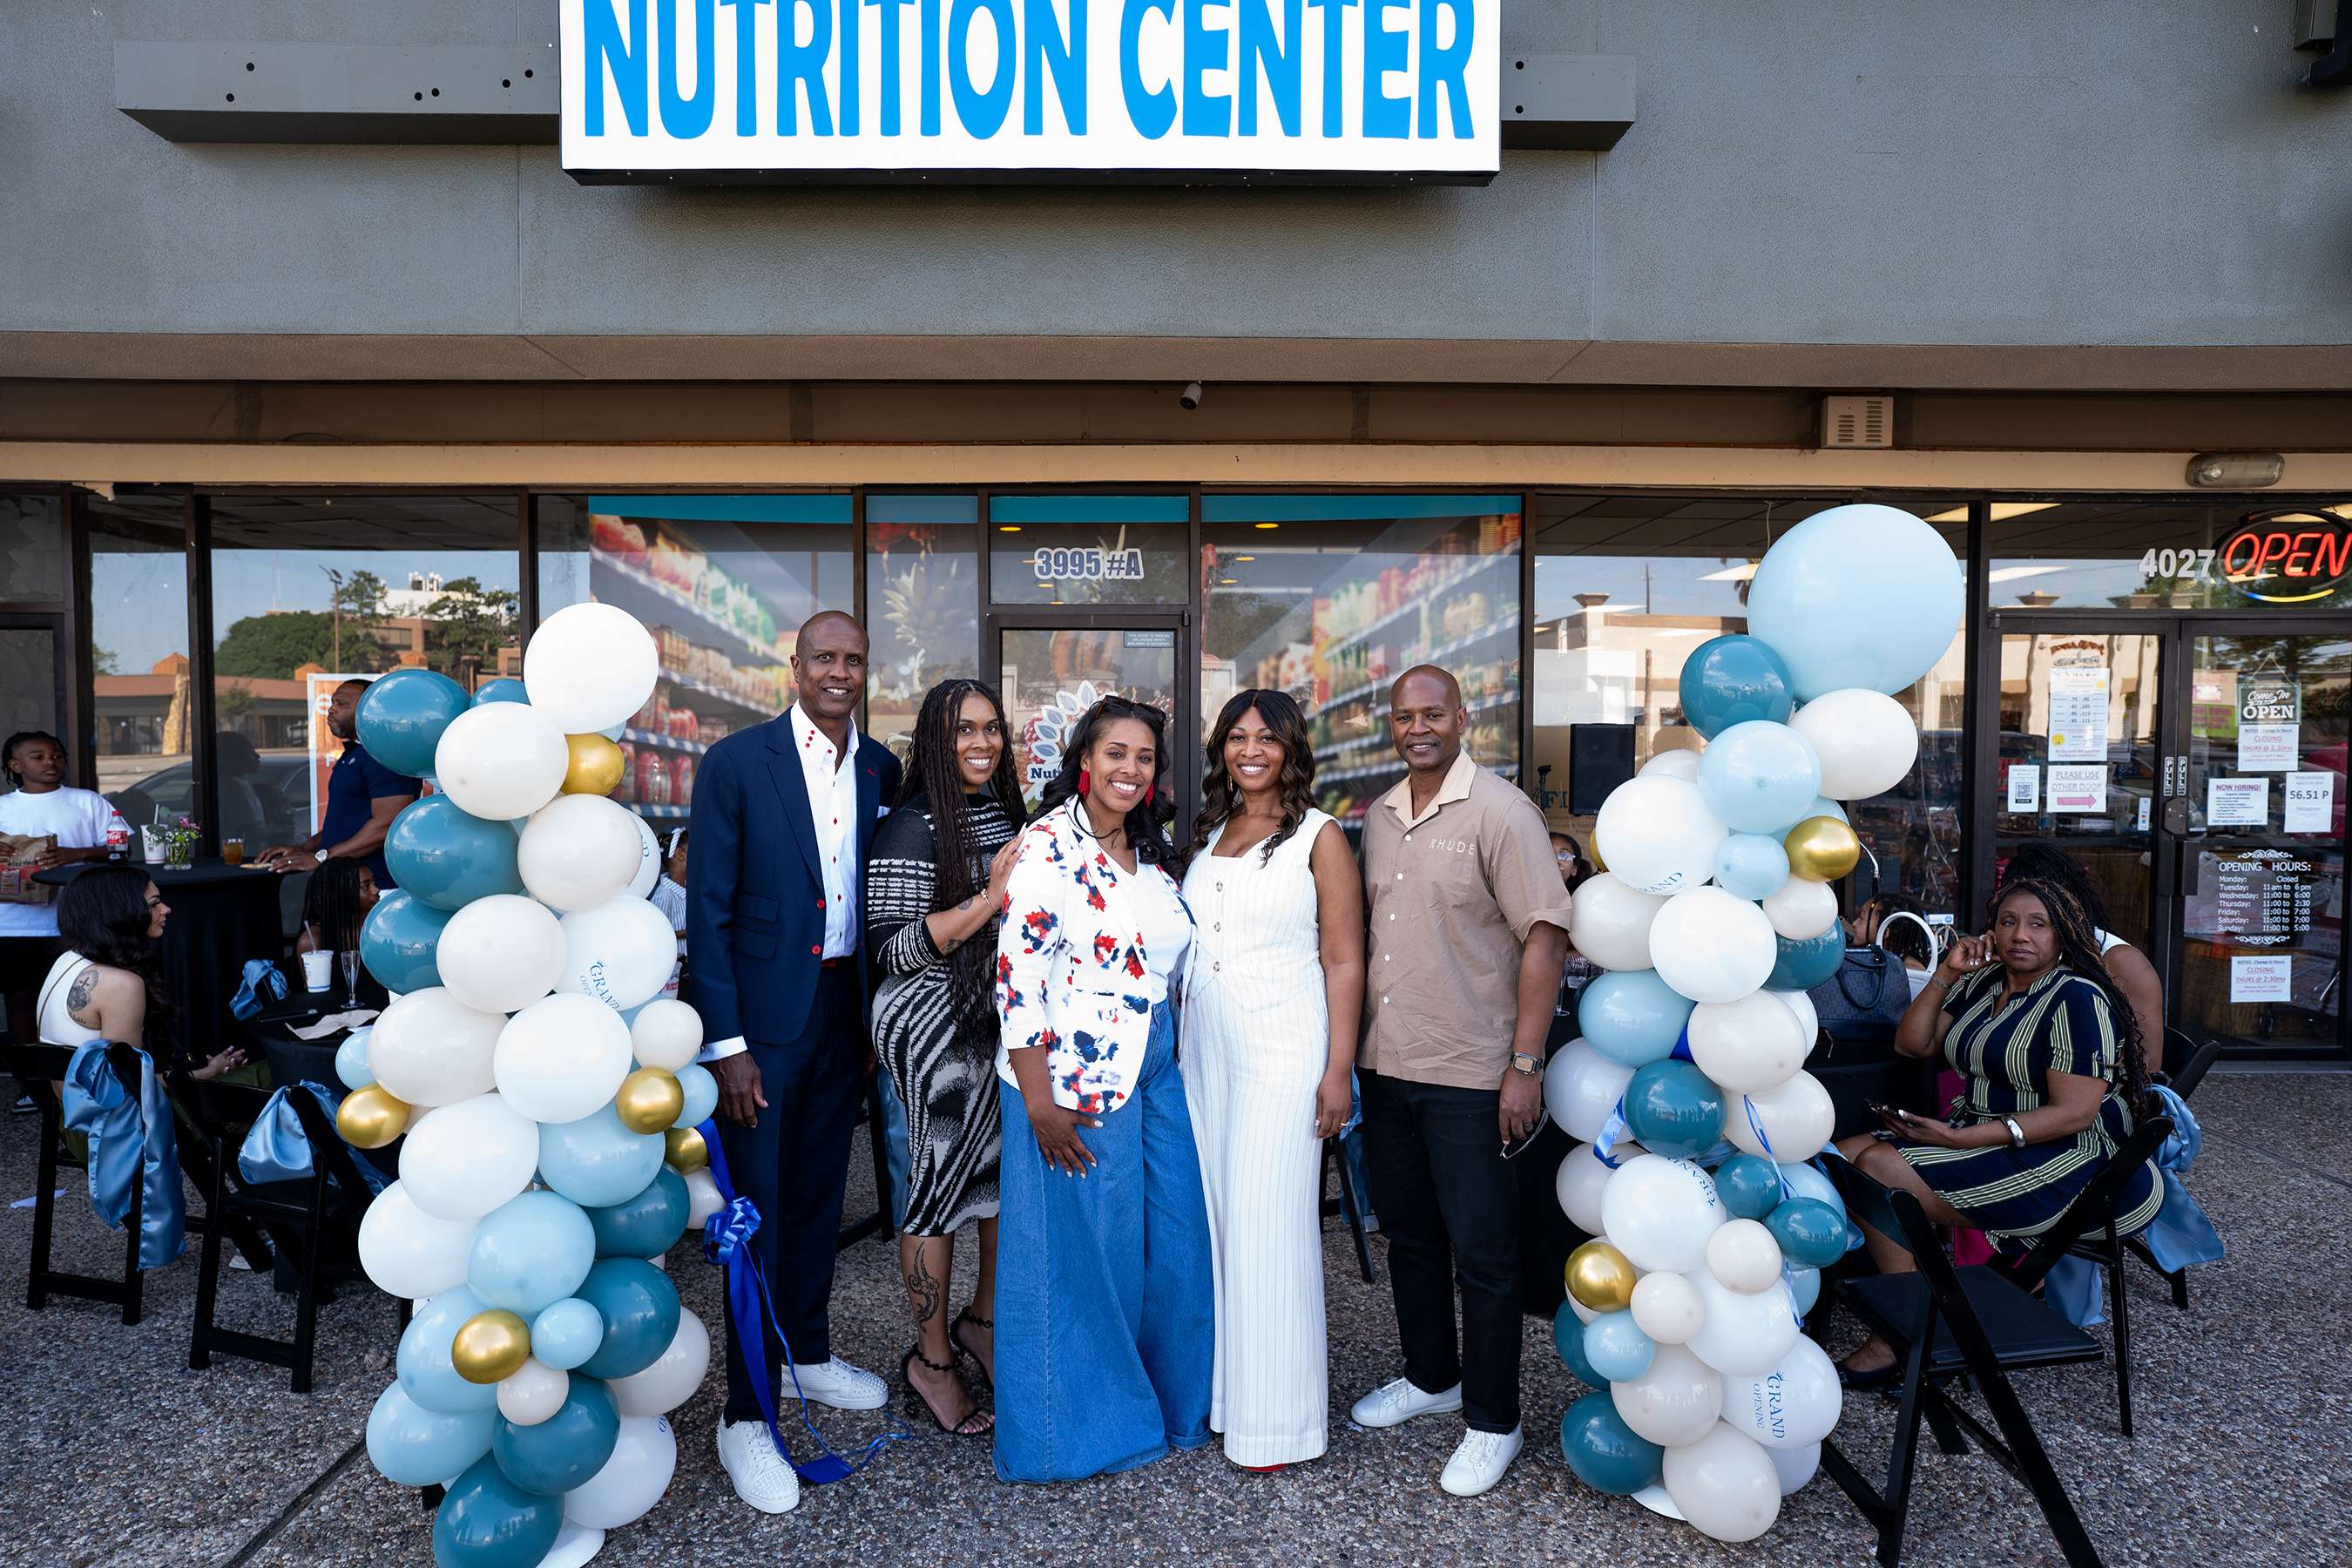 Angels Nest, Mentor Empower Motivate and Winners Circle Group of Texas Celebrate Nutrition Center Grand Opening